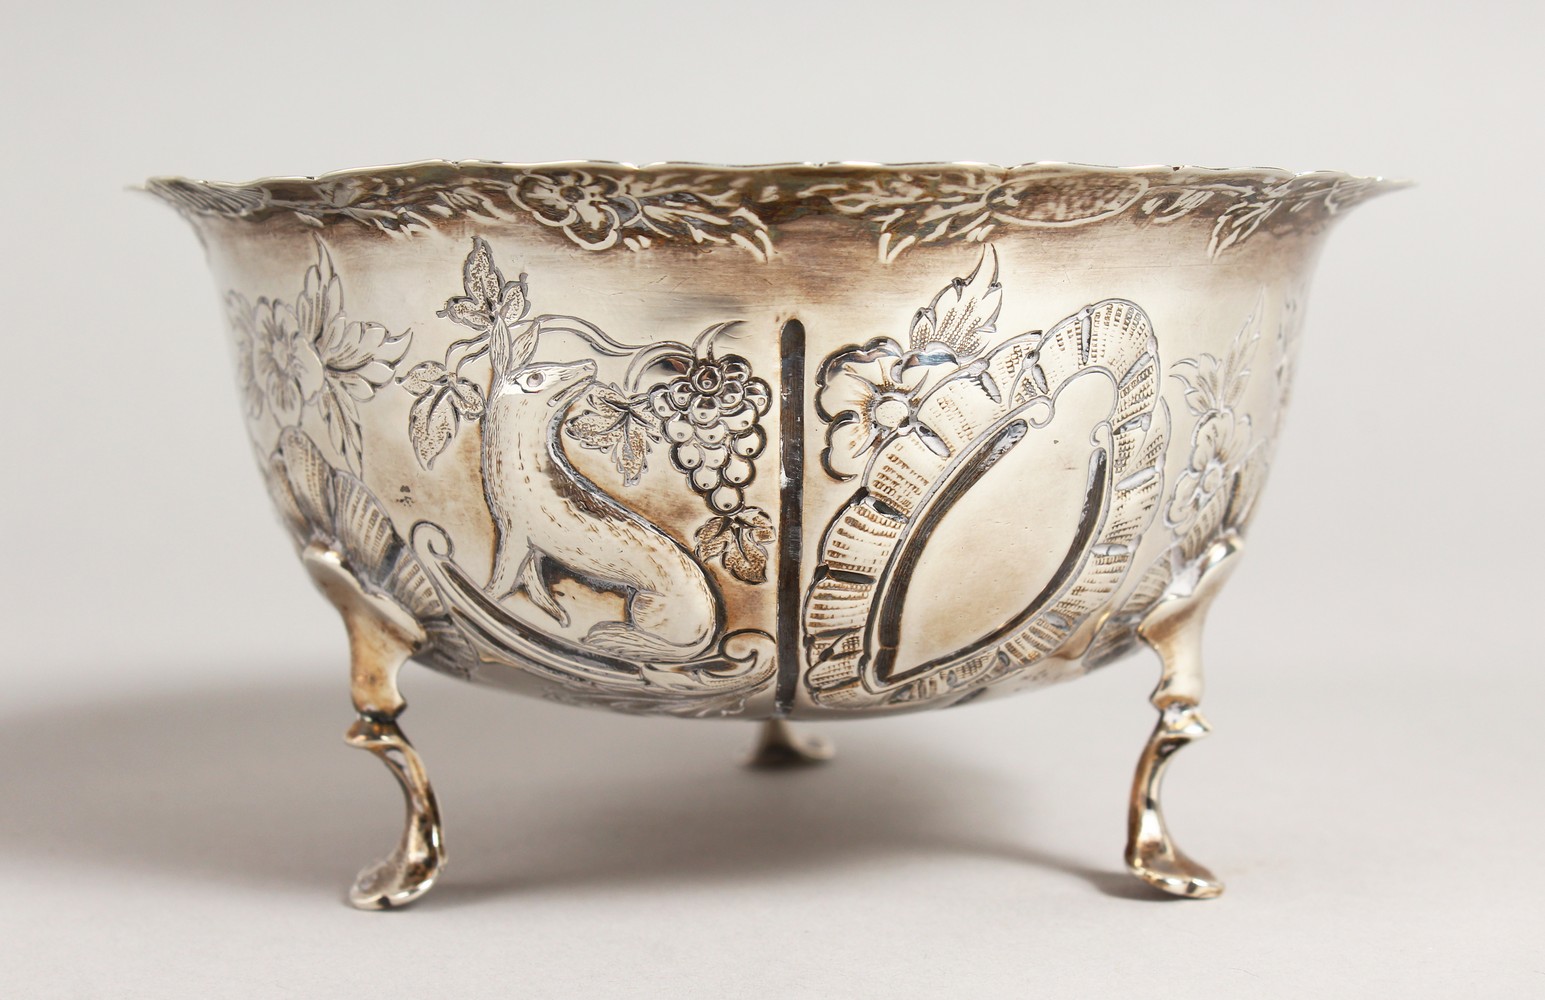 A VICTORIAN CIRCULAR SUGAR BOWL, repousse with birds, animals etc., on three pad feet. 4.75ins